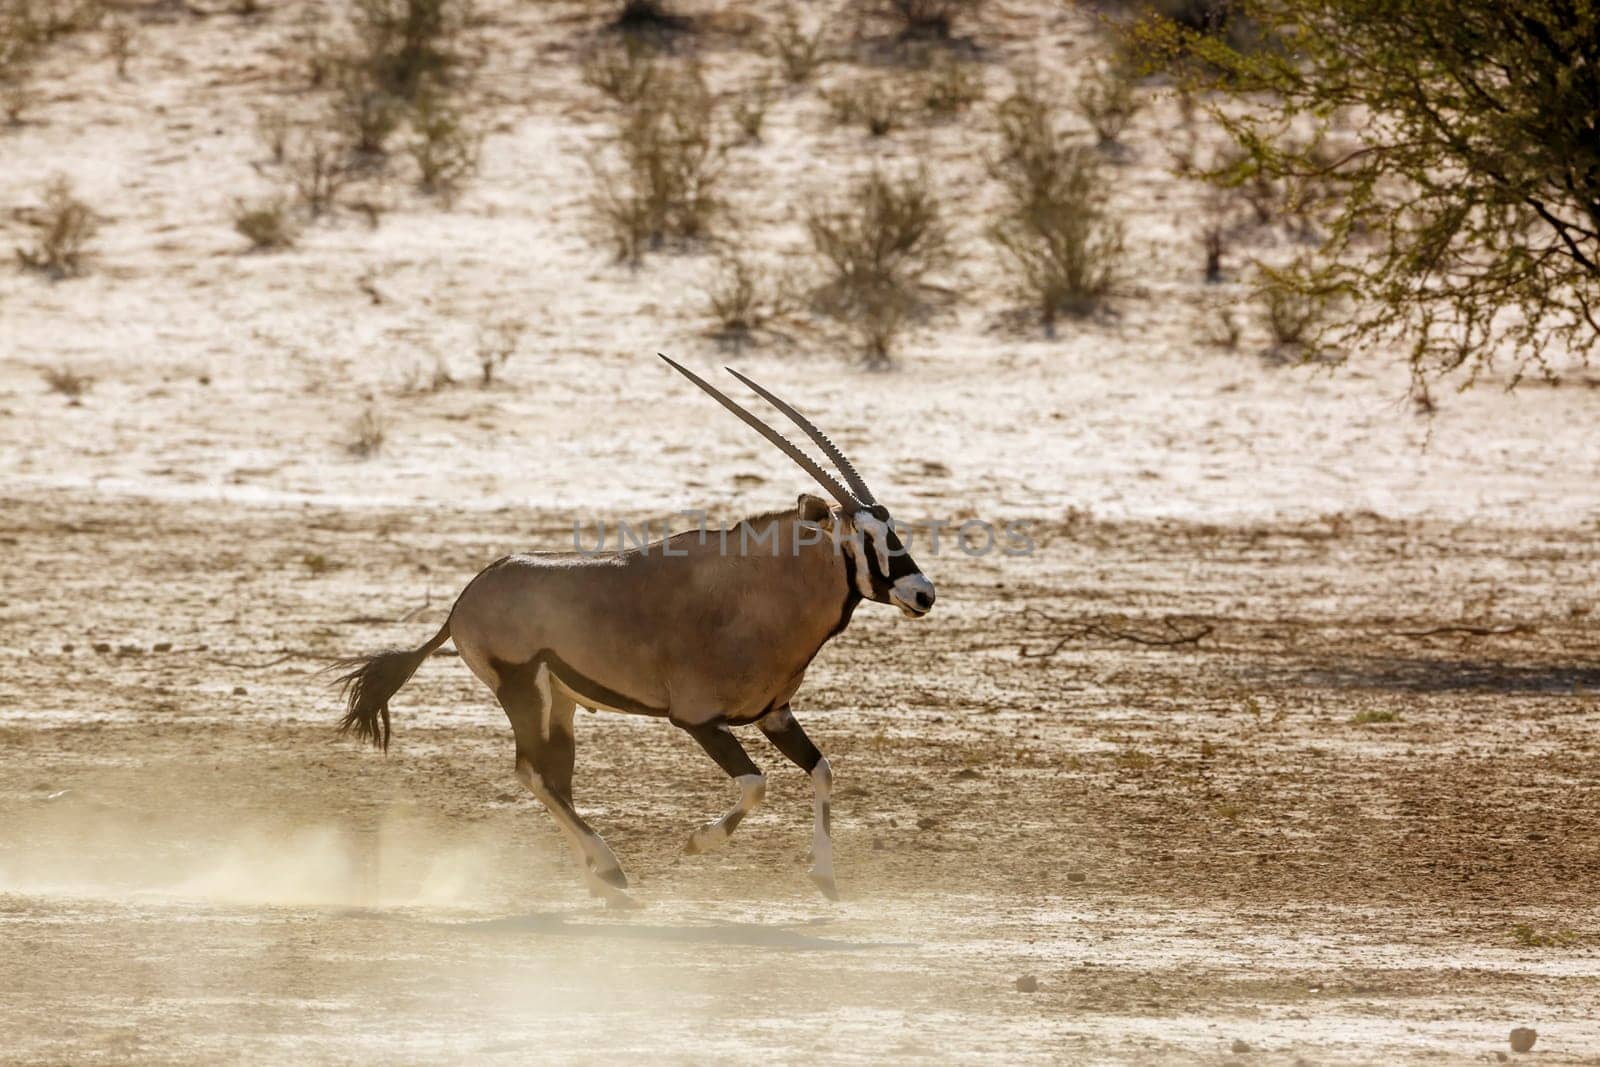 South African Oryx running in ssand of desert land in Kgalagadi transfrontier park, South Africa; specie Oryx gazella family of Bovidae